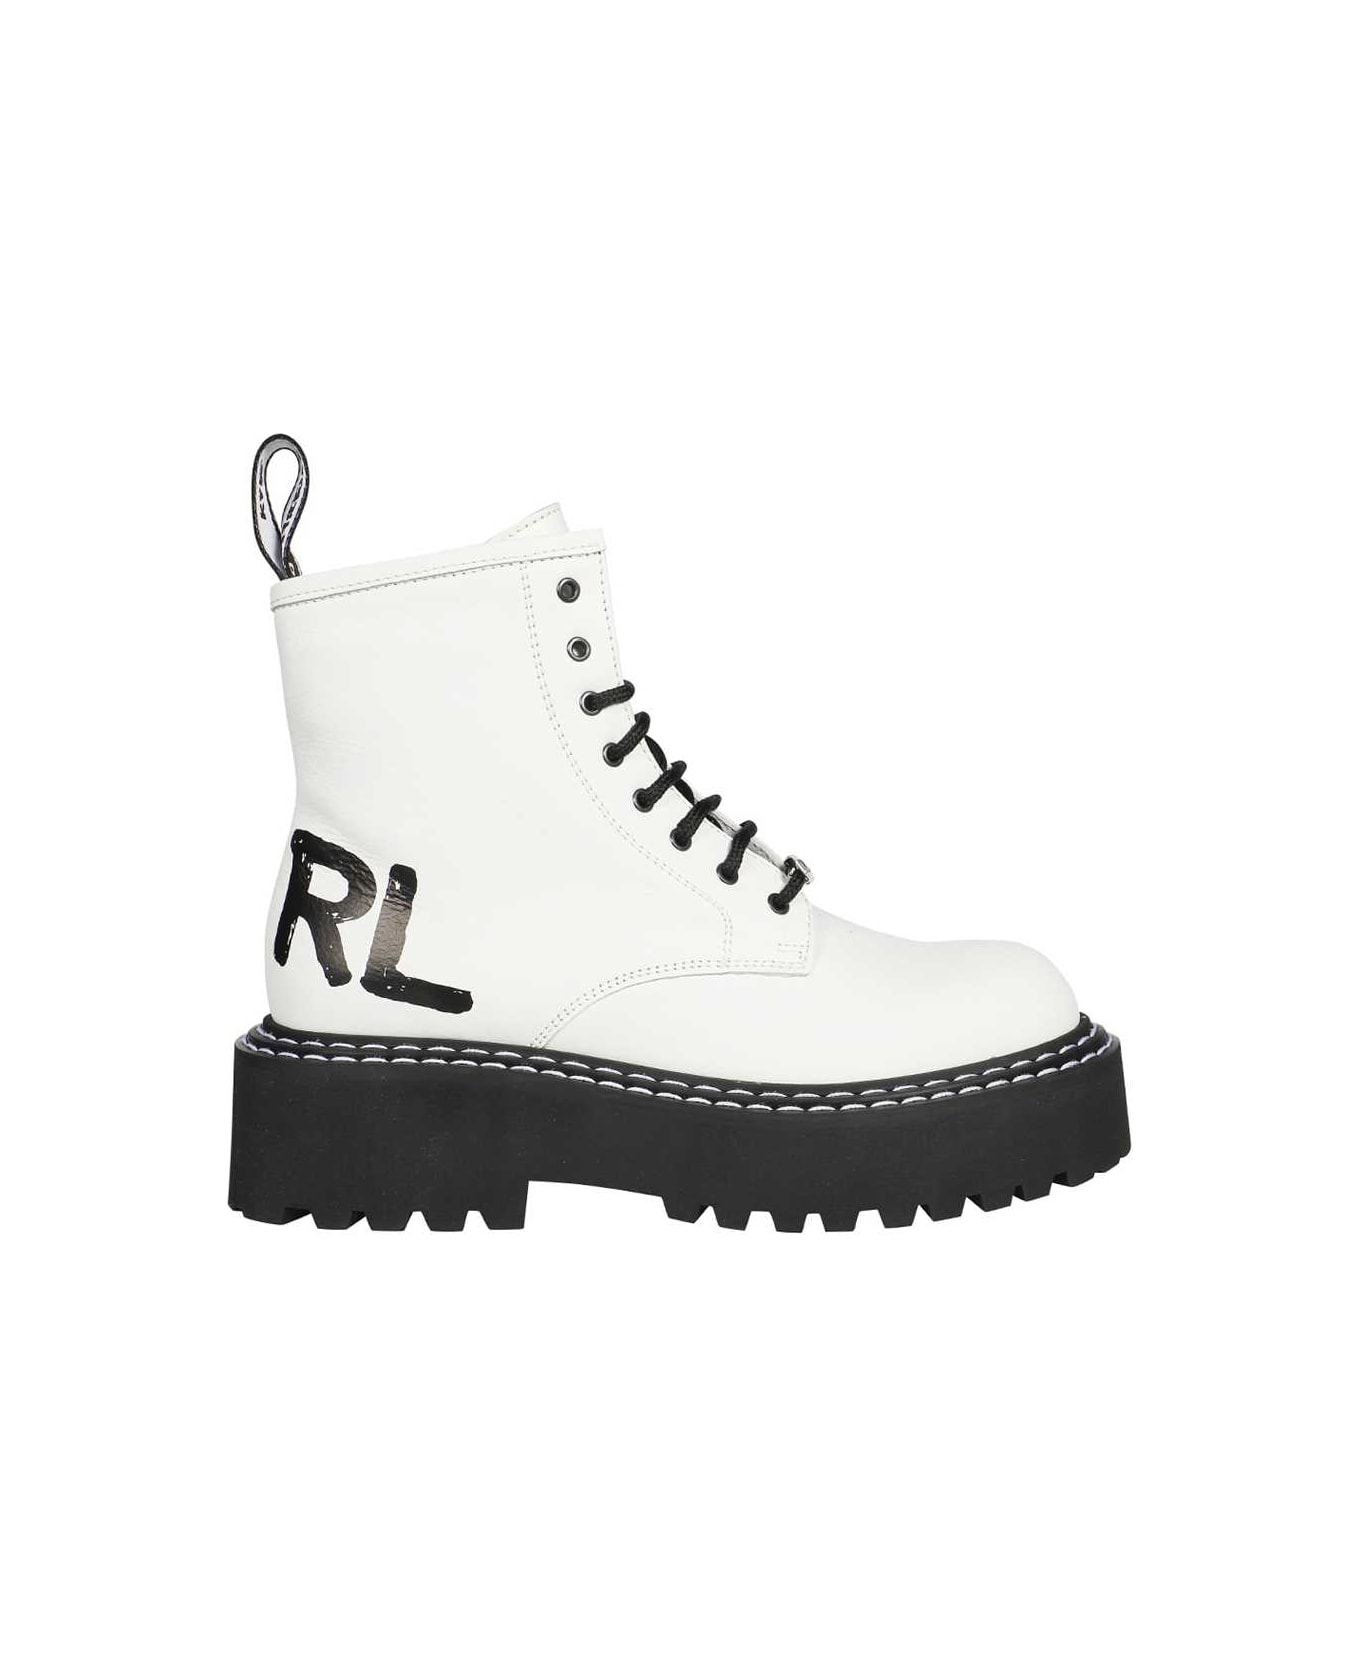 Karl Lagerfeld Lace-up Ankle Boots - White